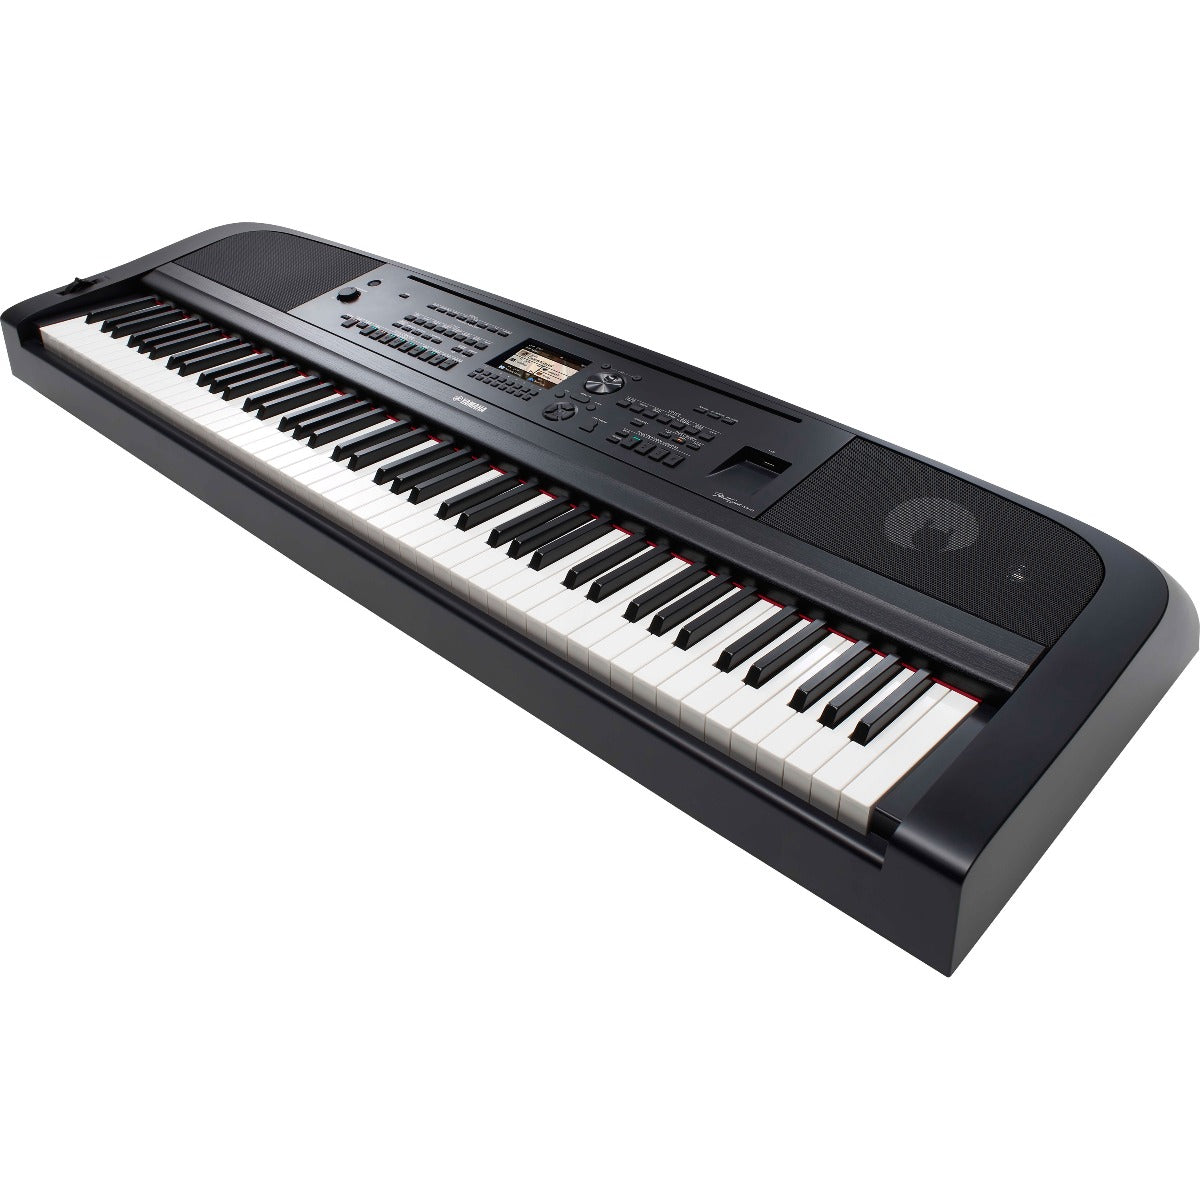 3/4 view of Yamaha DGX-670 Portable Grand Digital Piano - Black showing top, front and right side